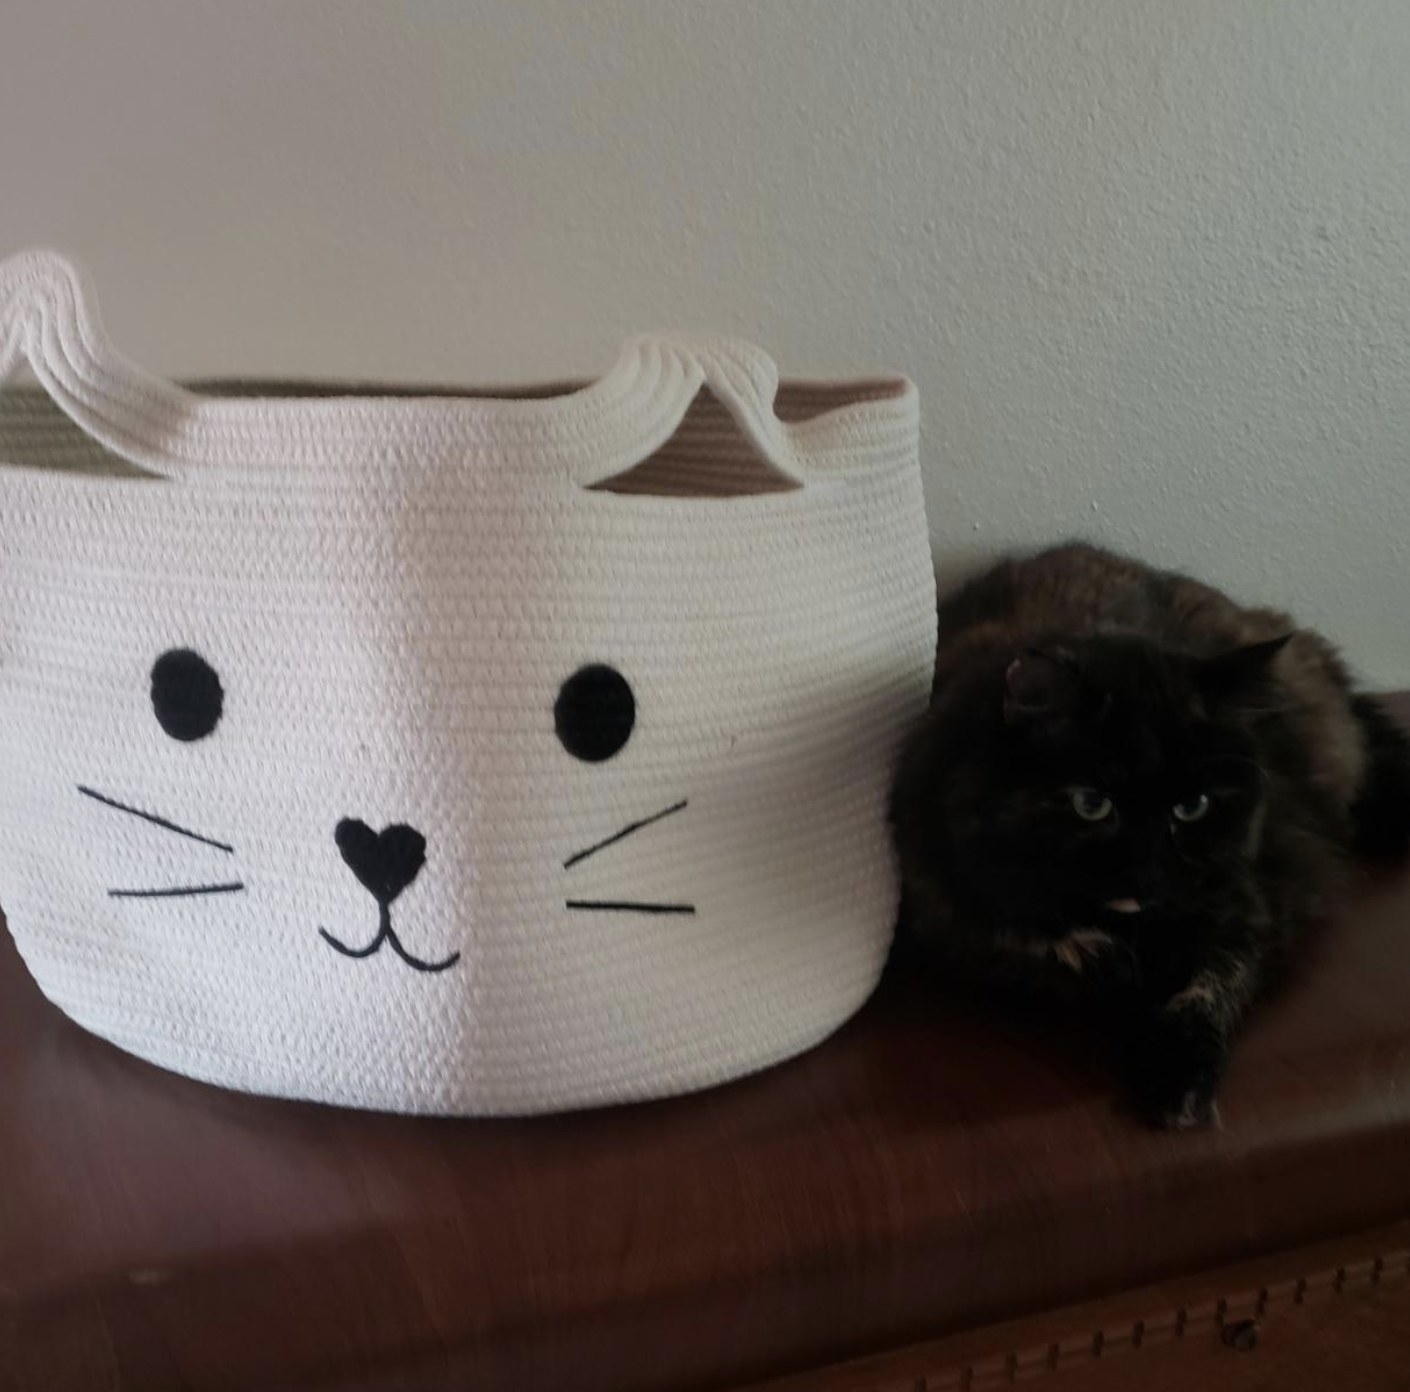 a brown and black cat sitting next to a white woven basket with a cat design stitched on